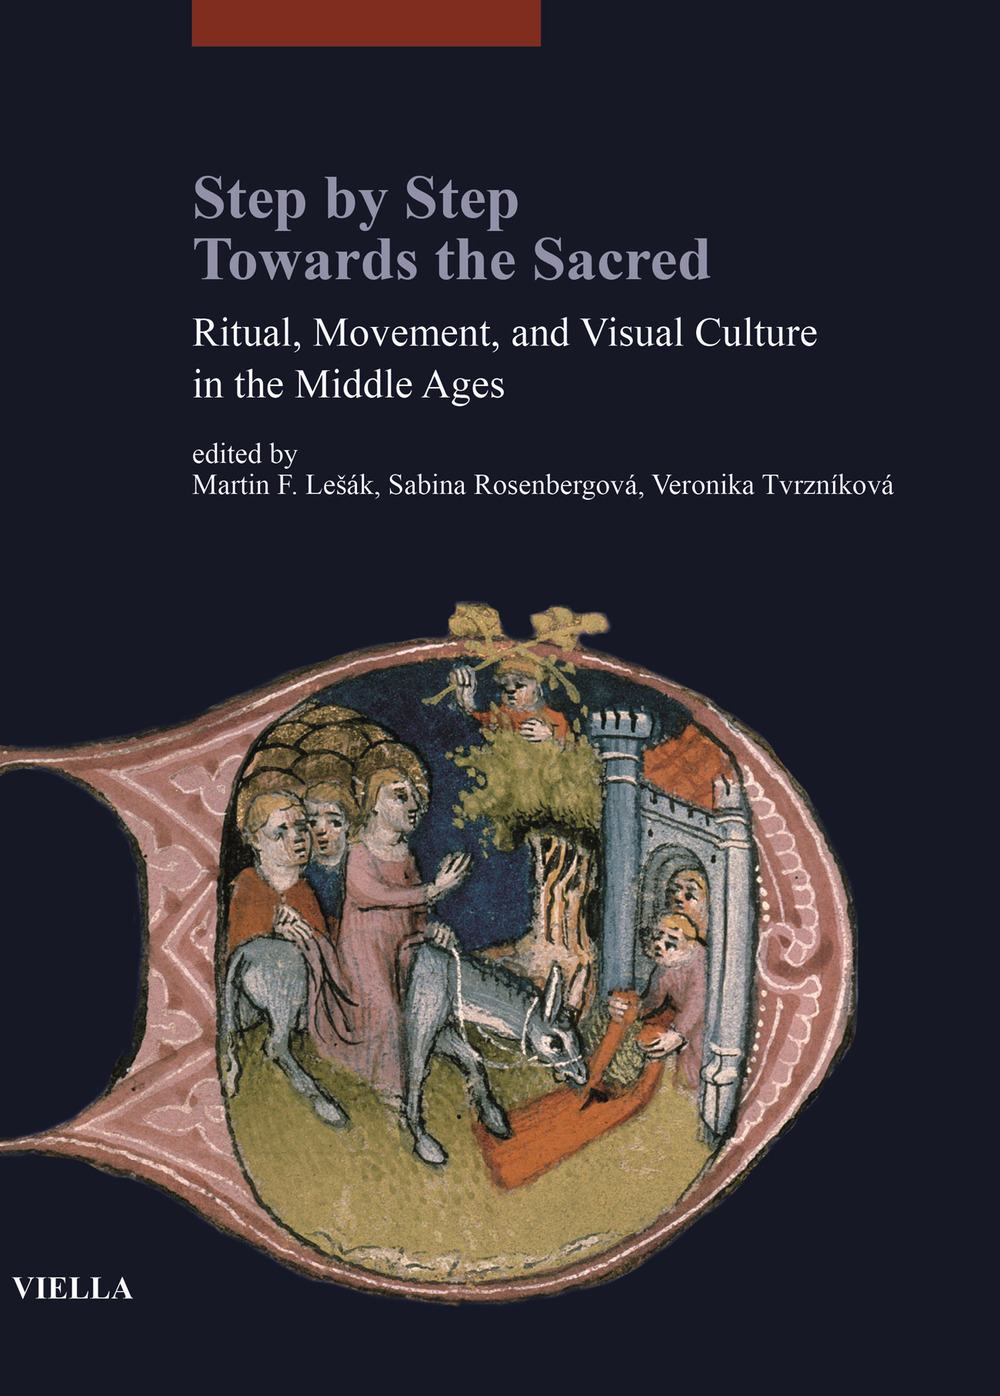 Step by step. Towards the sacred. Ritual, movement, and visual culture in the Middle Ages